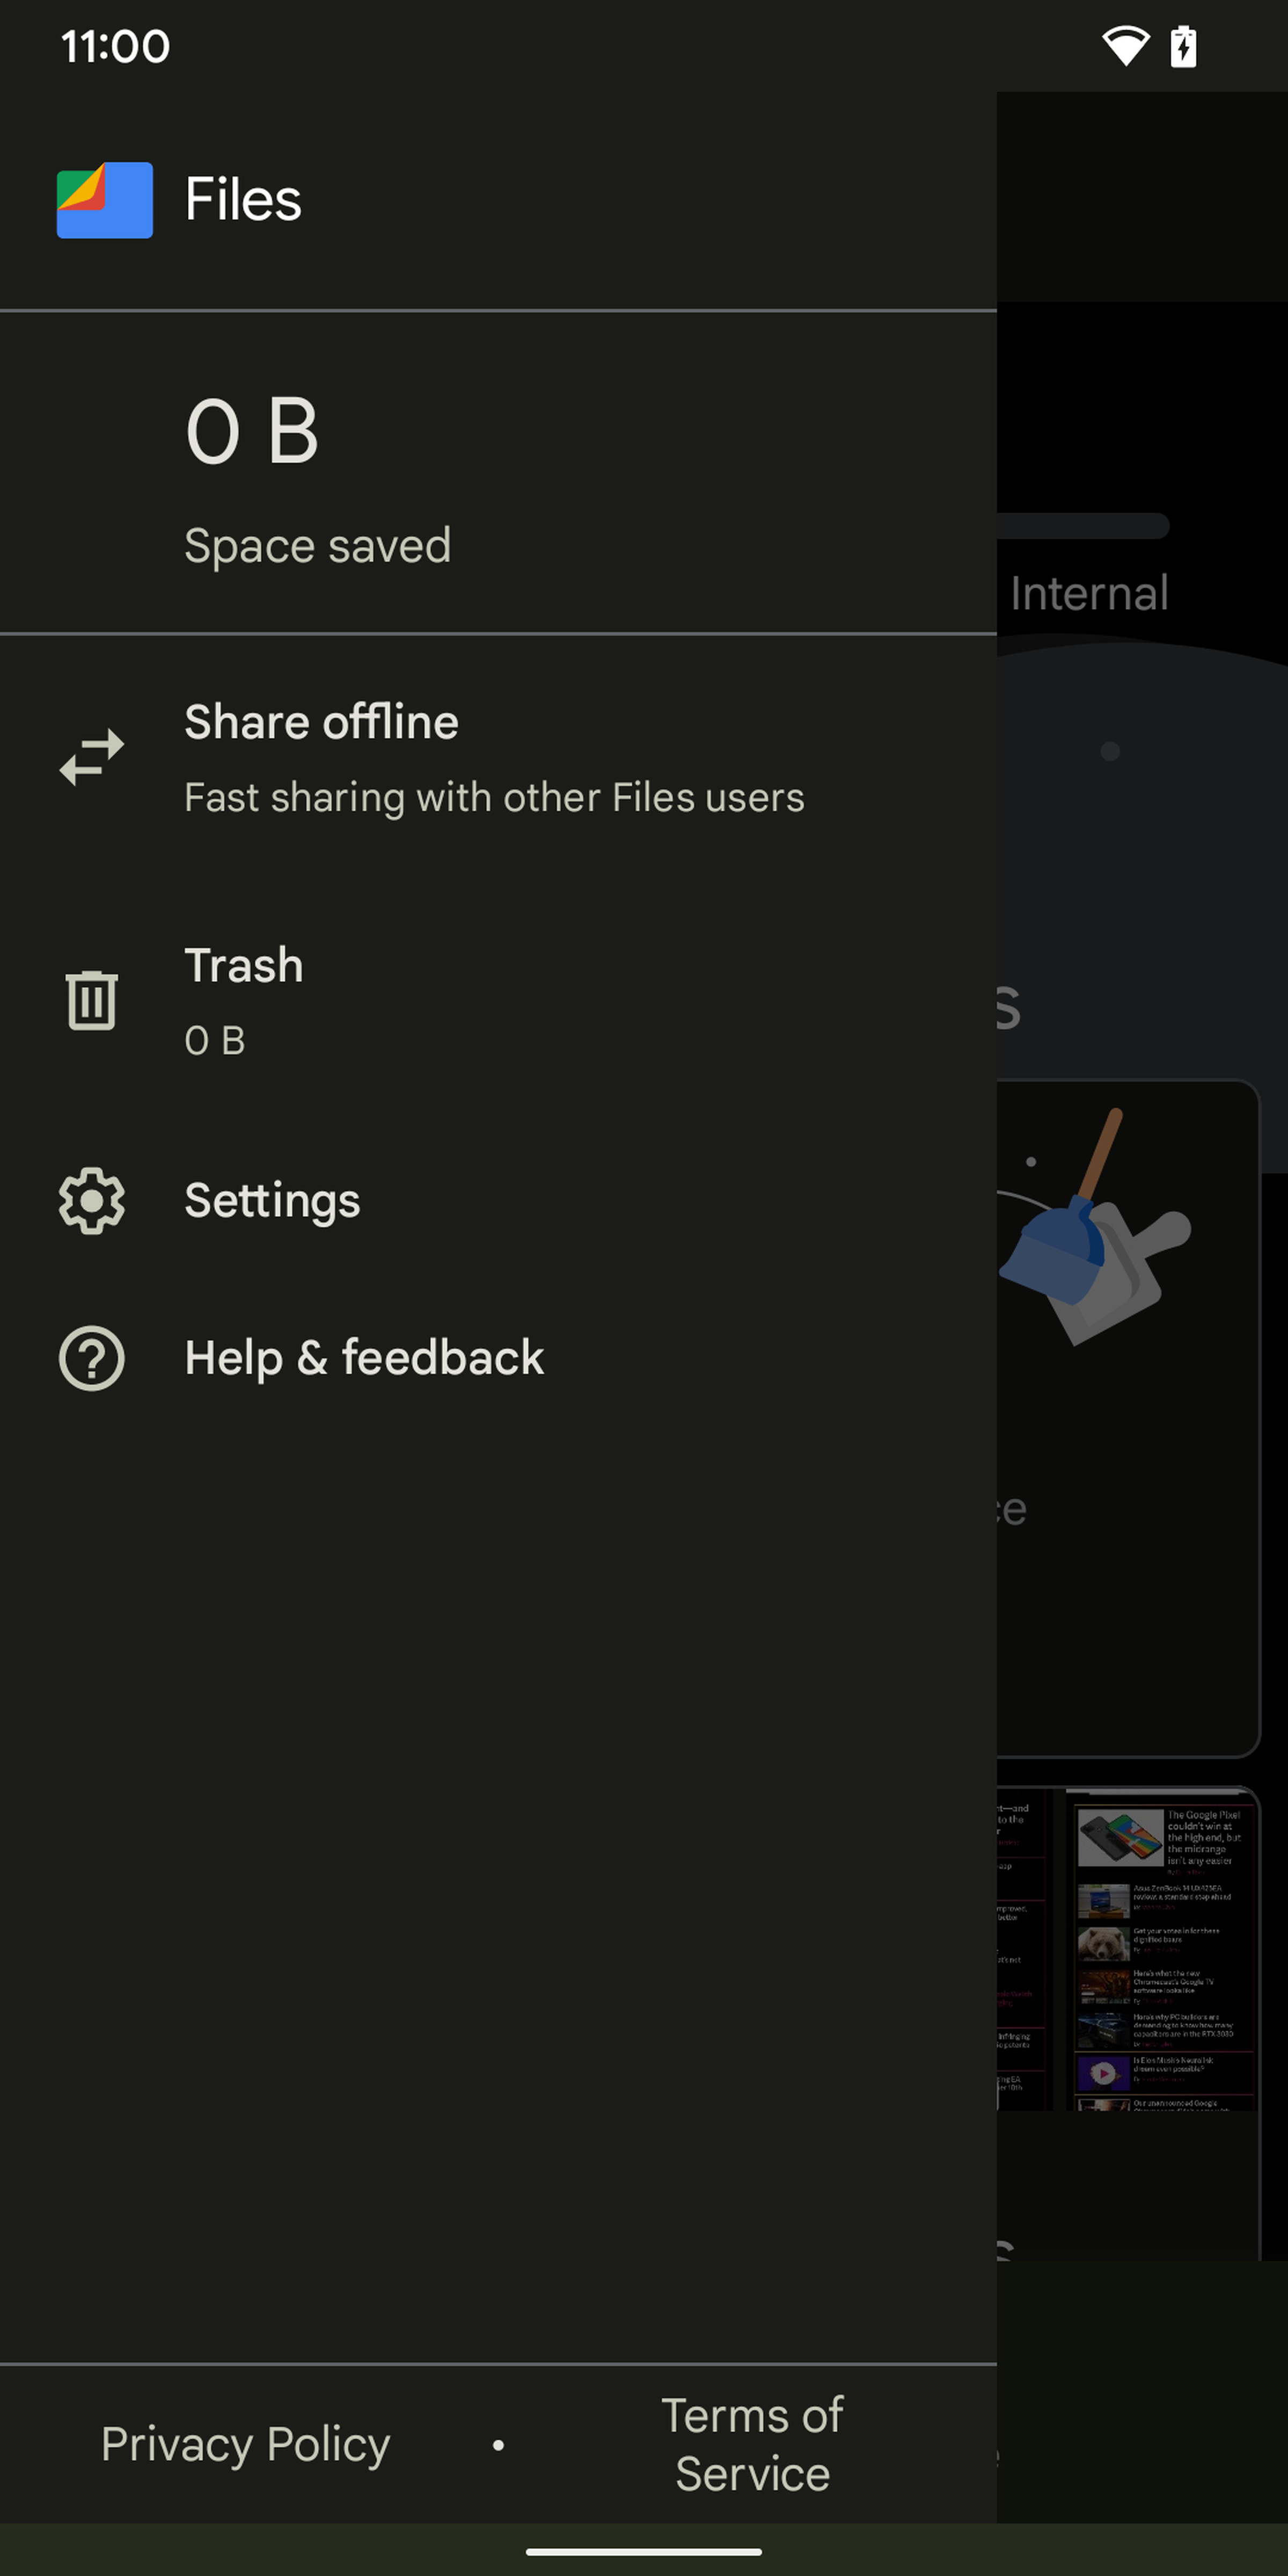 Go to the Settings for the Files app.